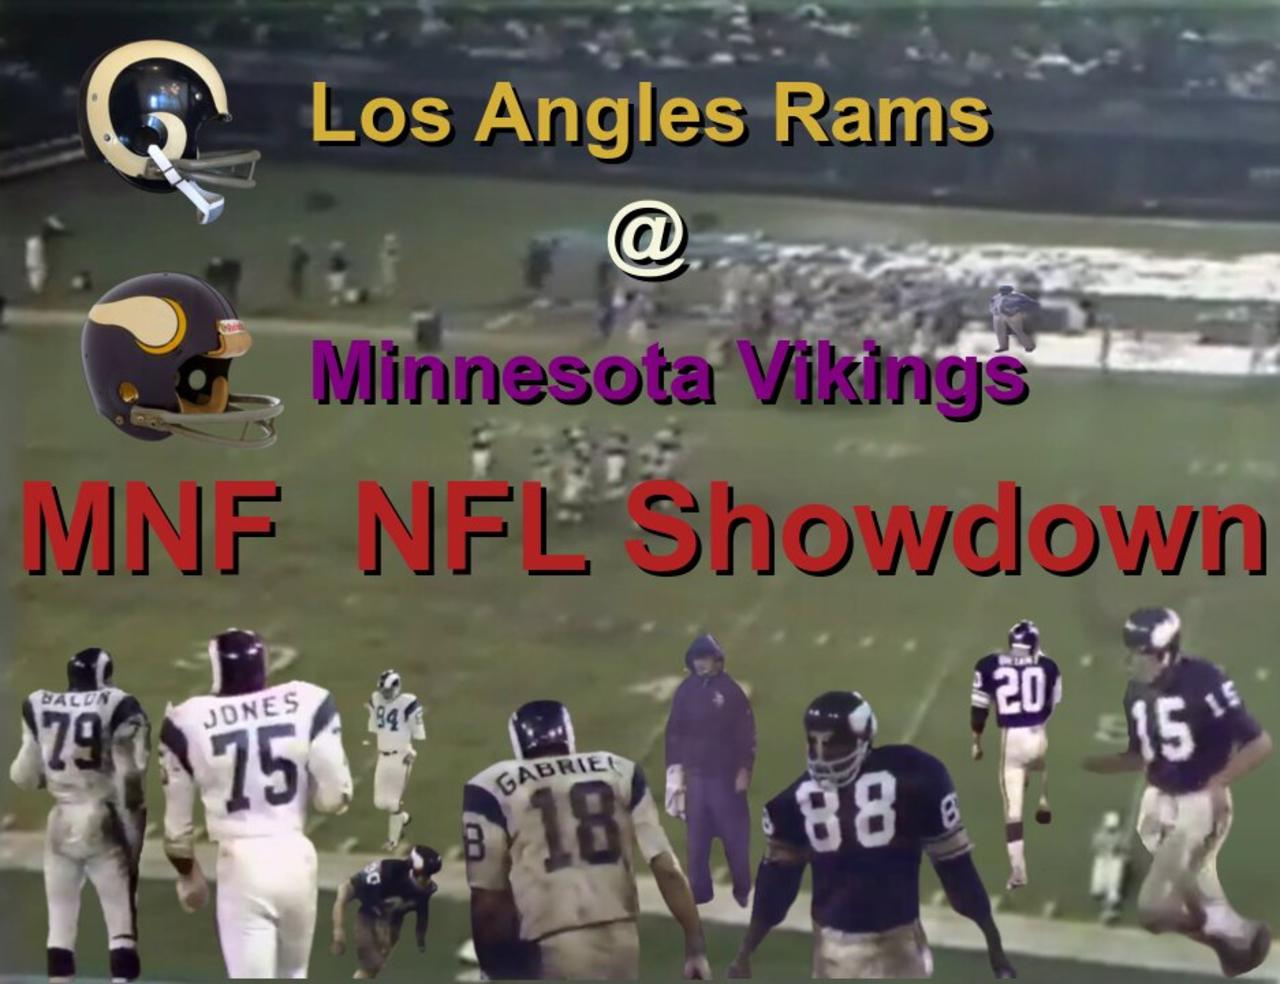 NFL MNF Rams at Vikings in drive in format clash of the Titans